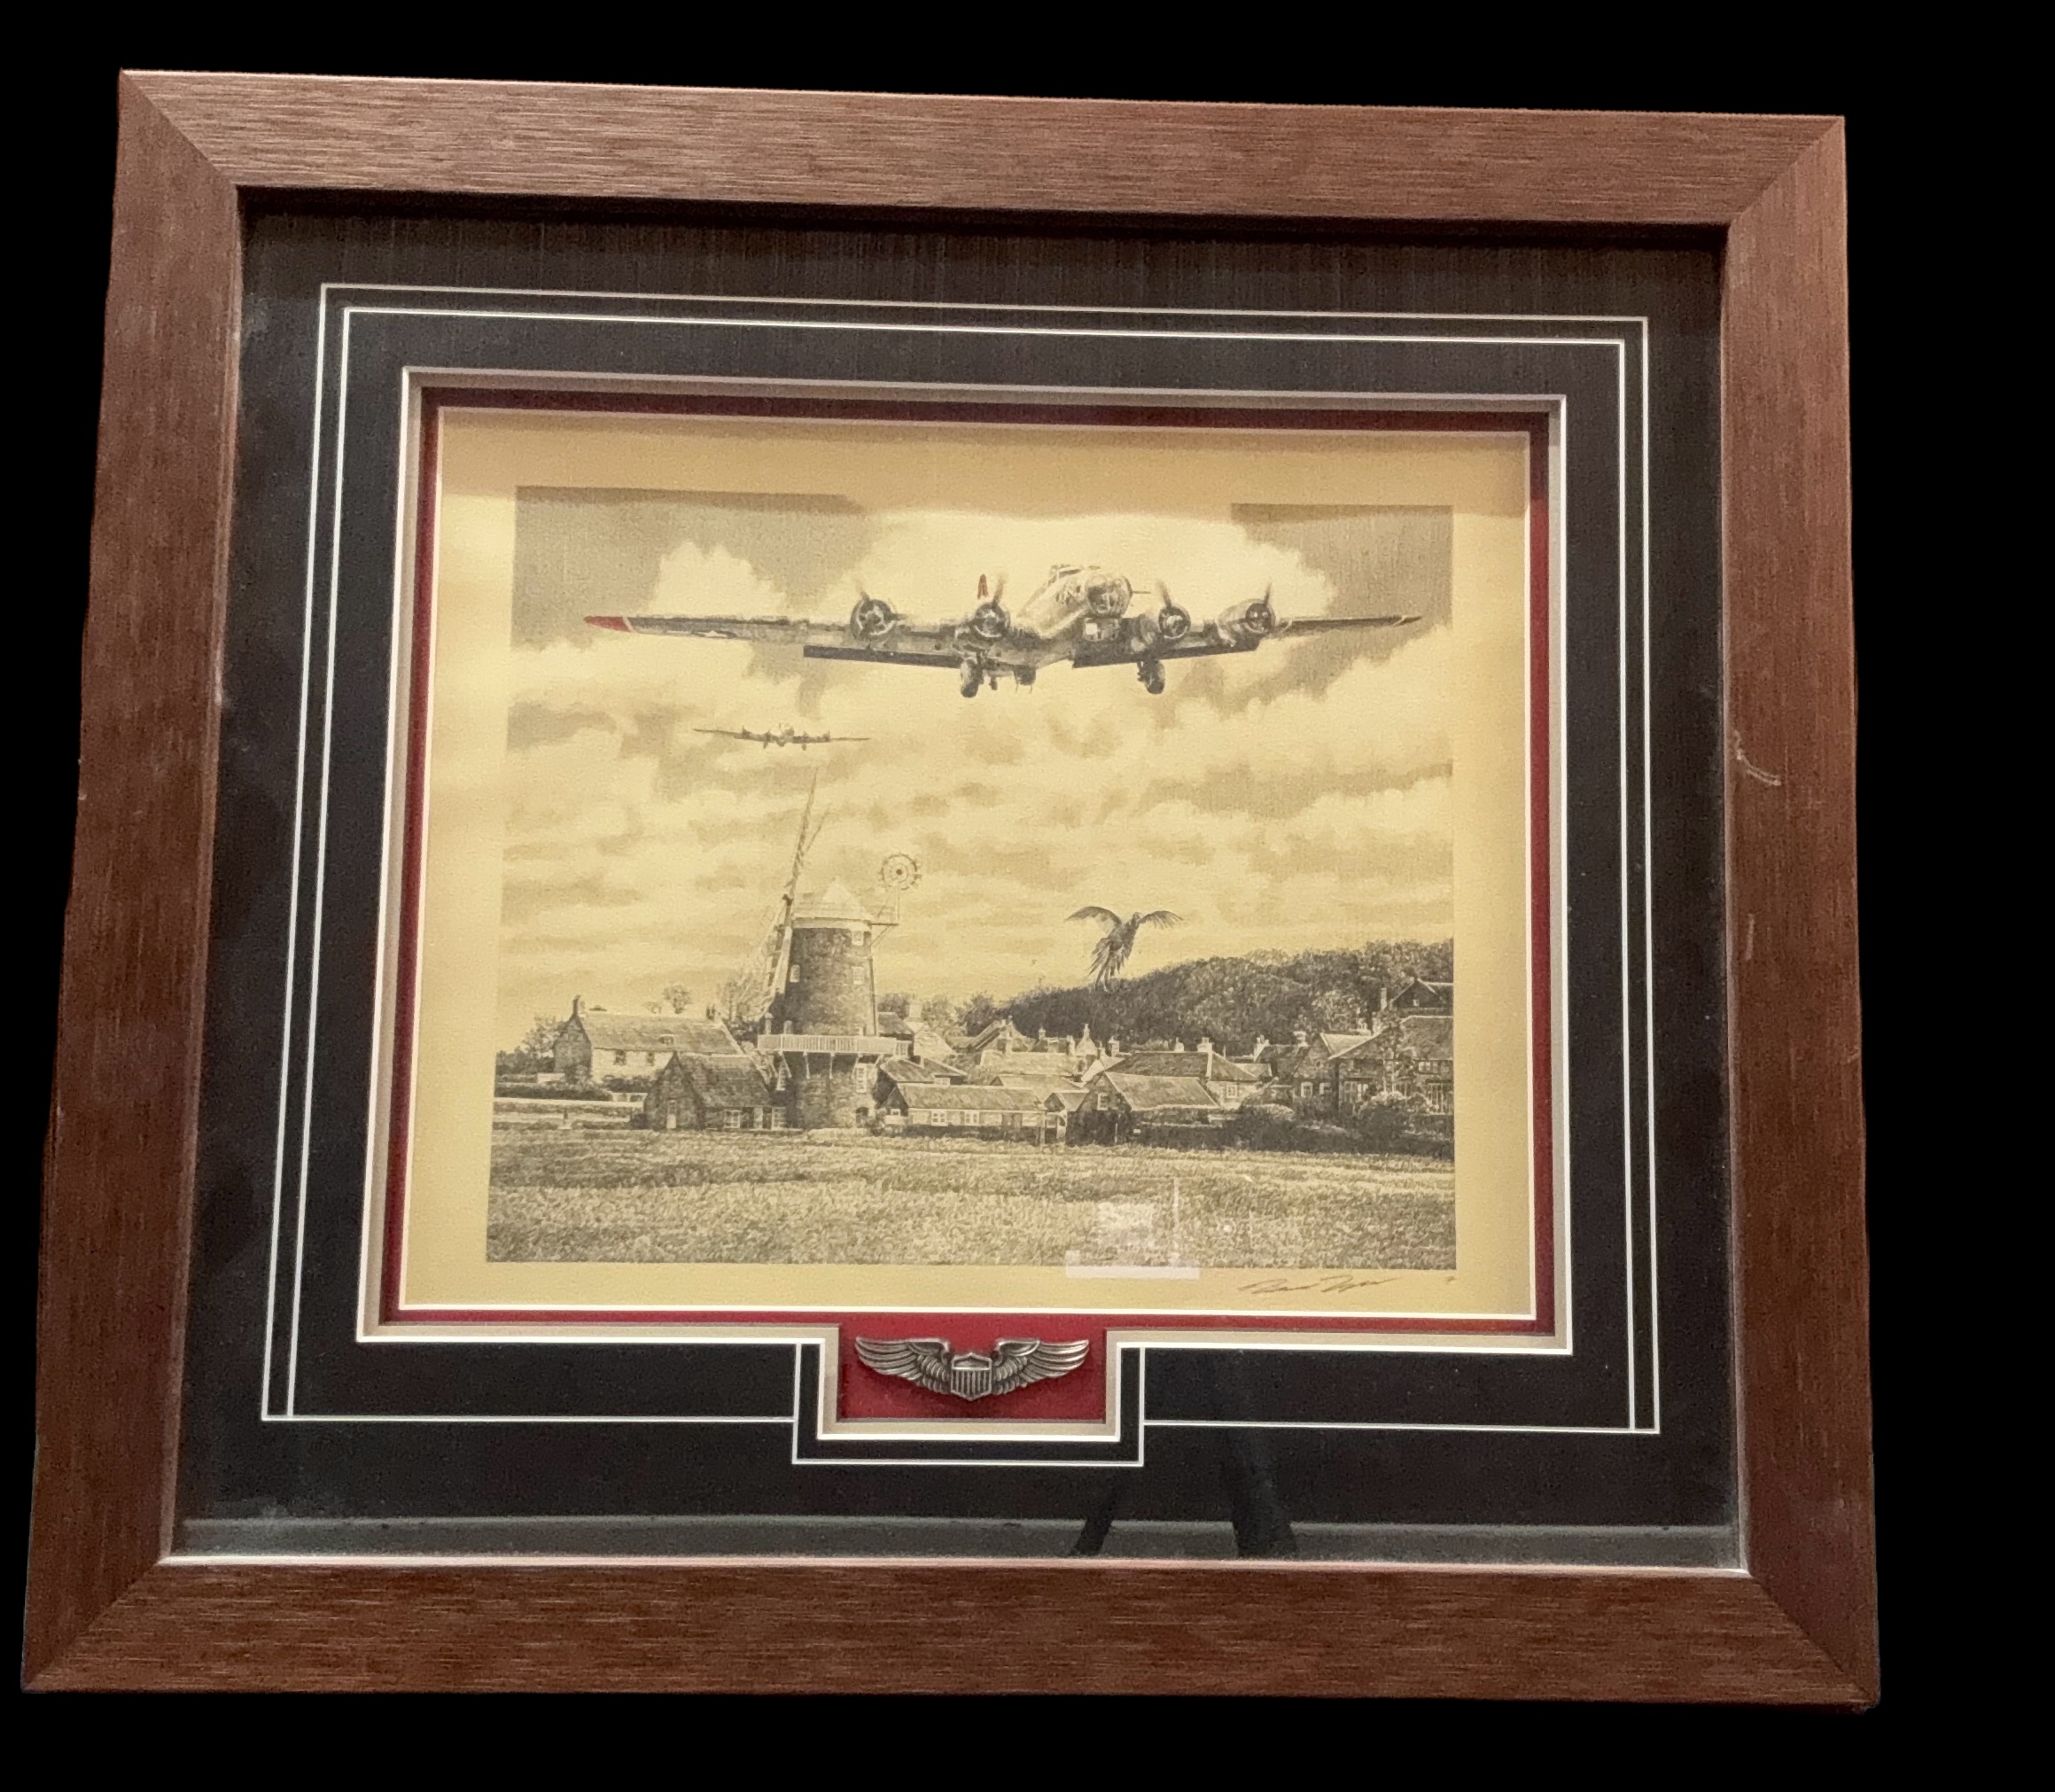 USAF B17 Bomber WWII print 24x22 inch framed and mounted signed in pencil by the artist Robert - Image 2 of 3